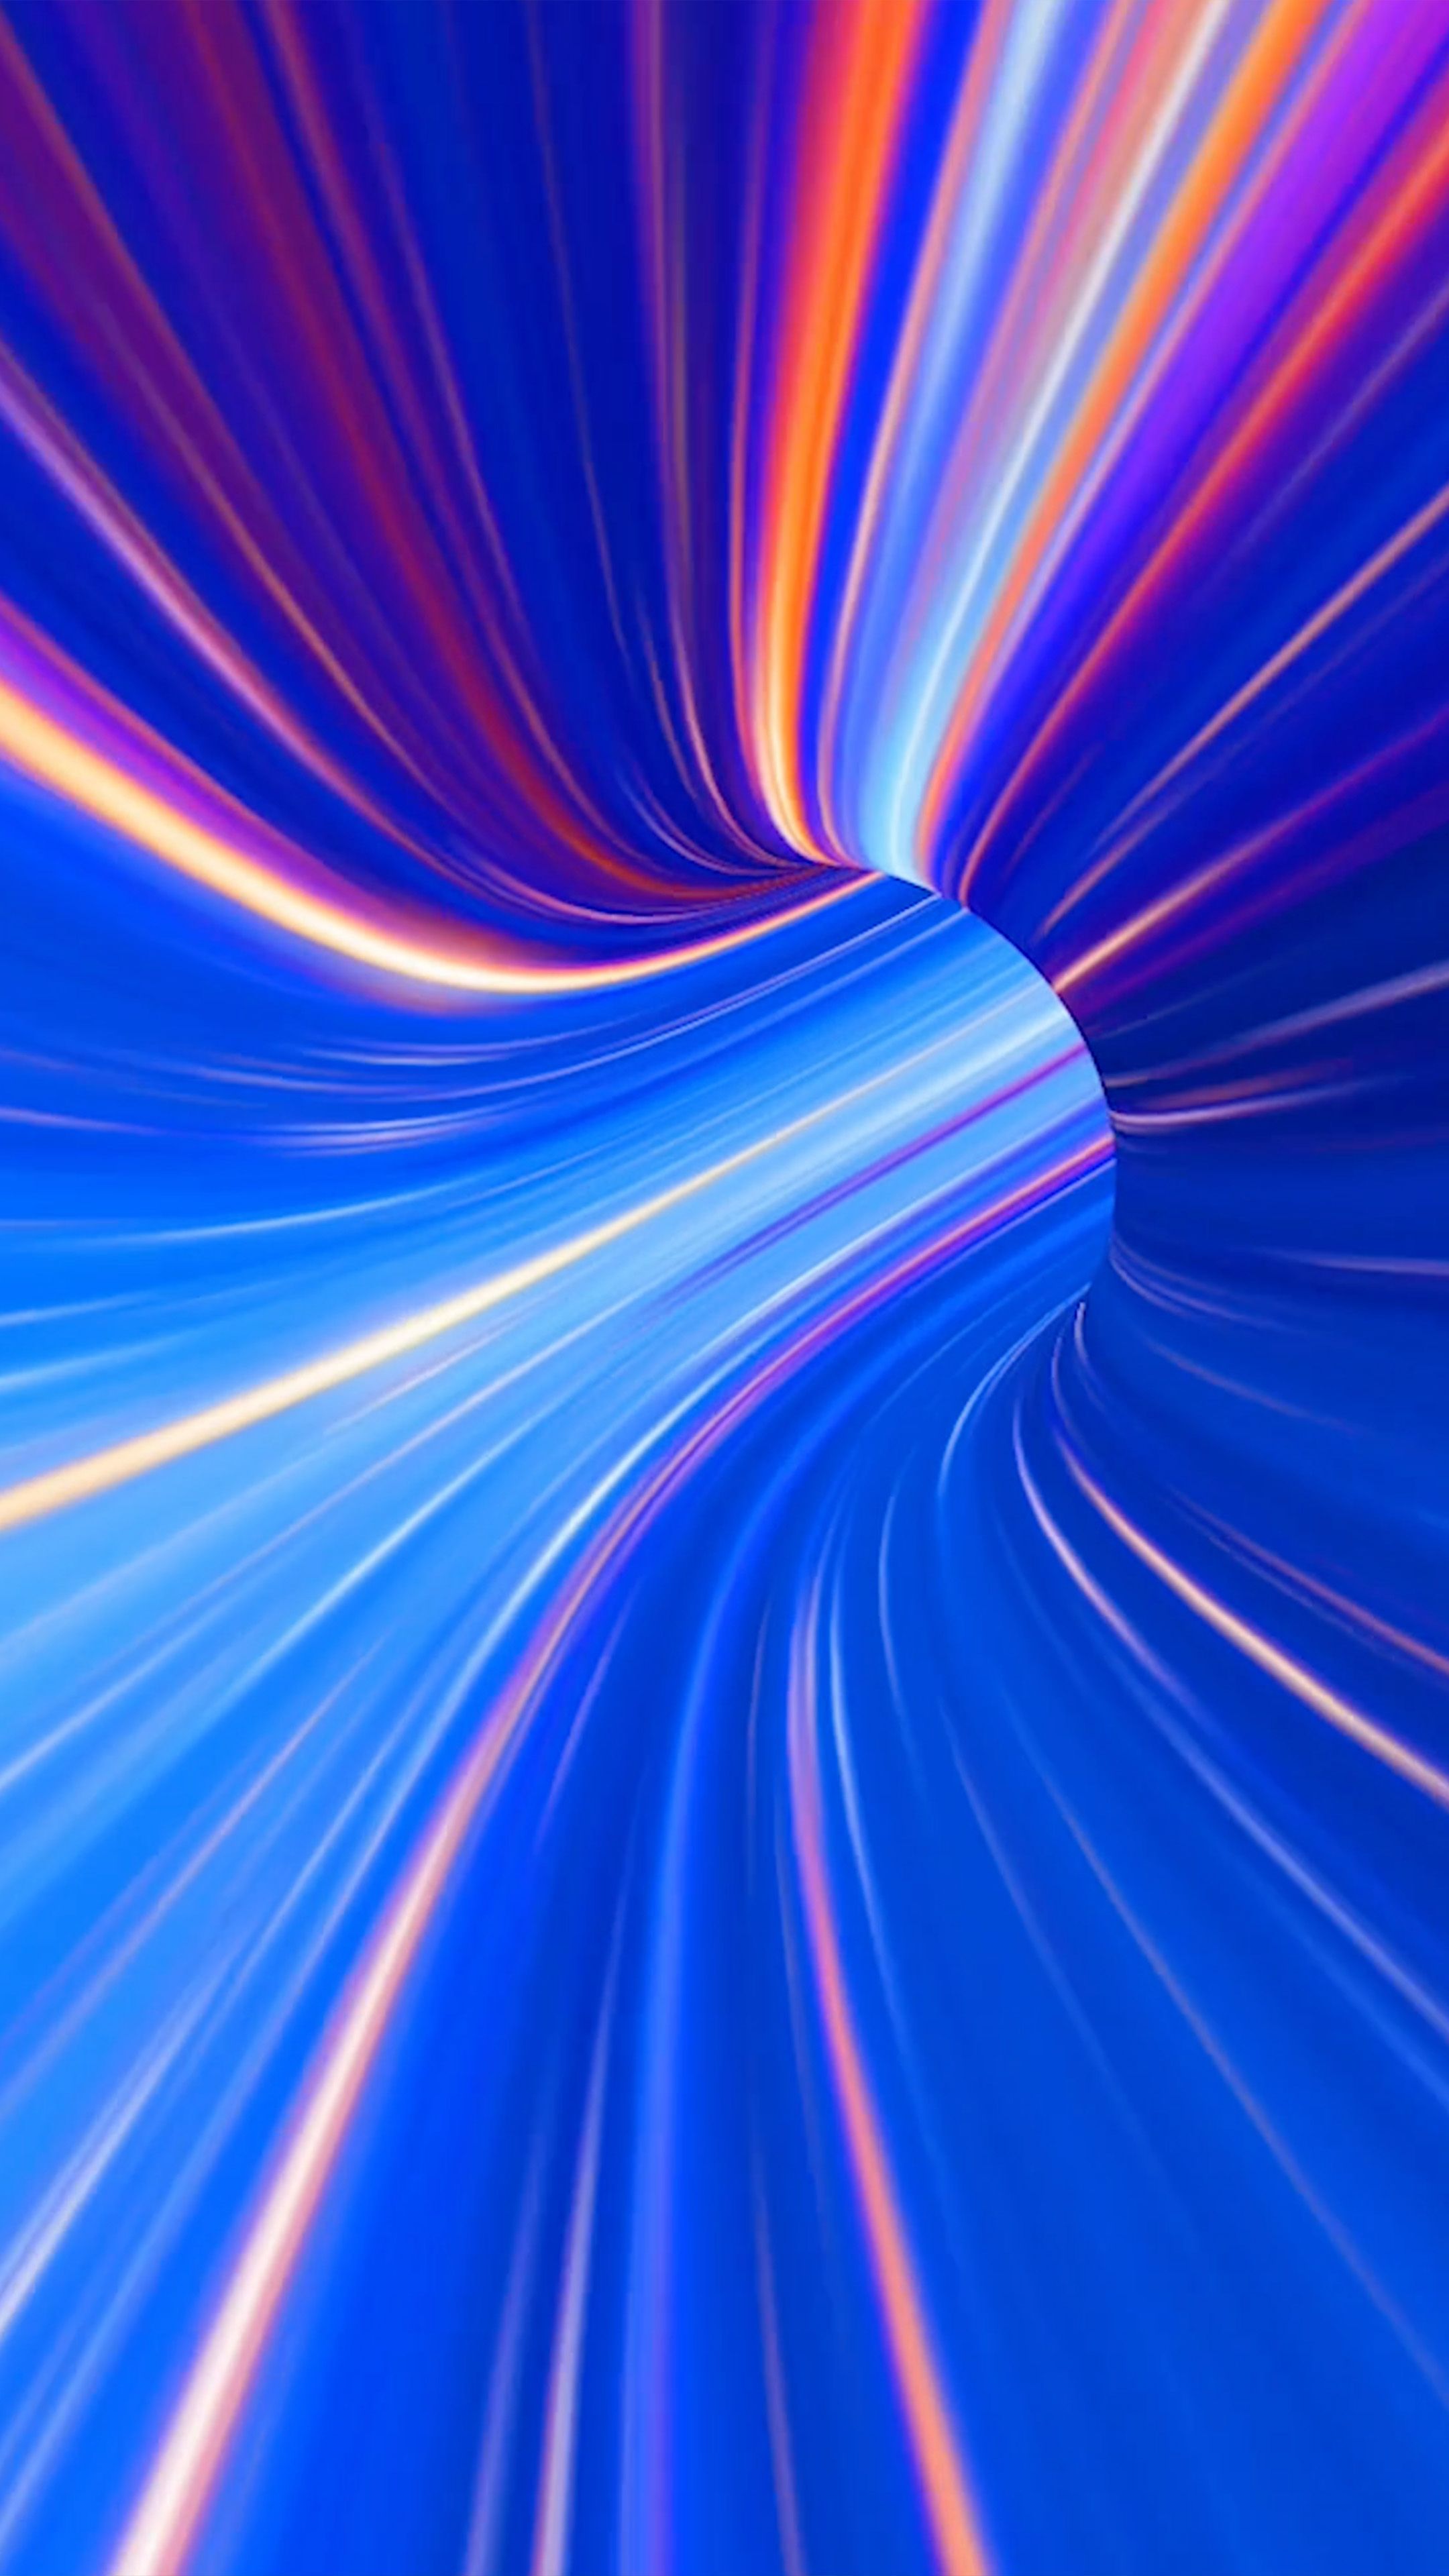 Spectrum Colorful Waves Tunnel Free 4K Ultra HD Mobile Wallpaper